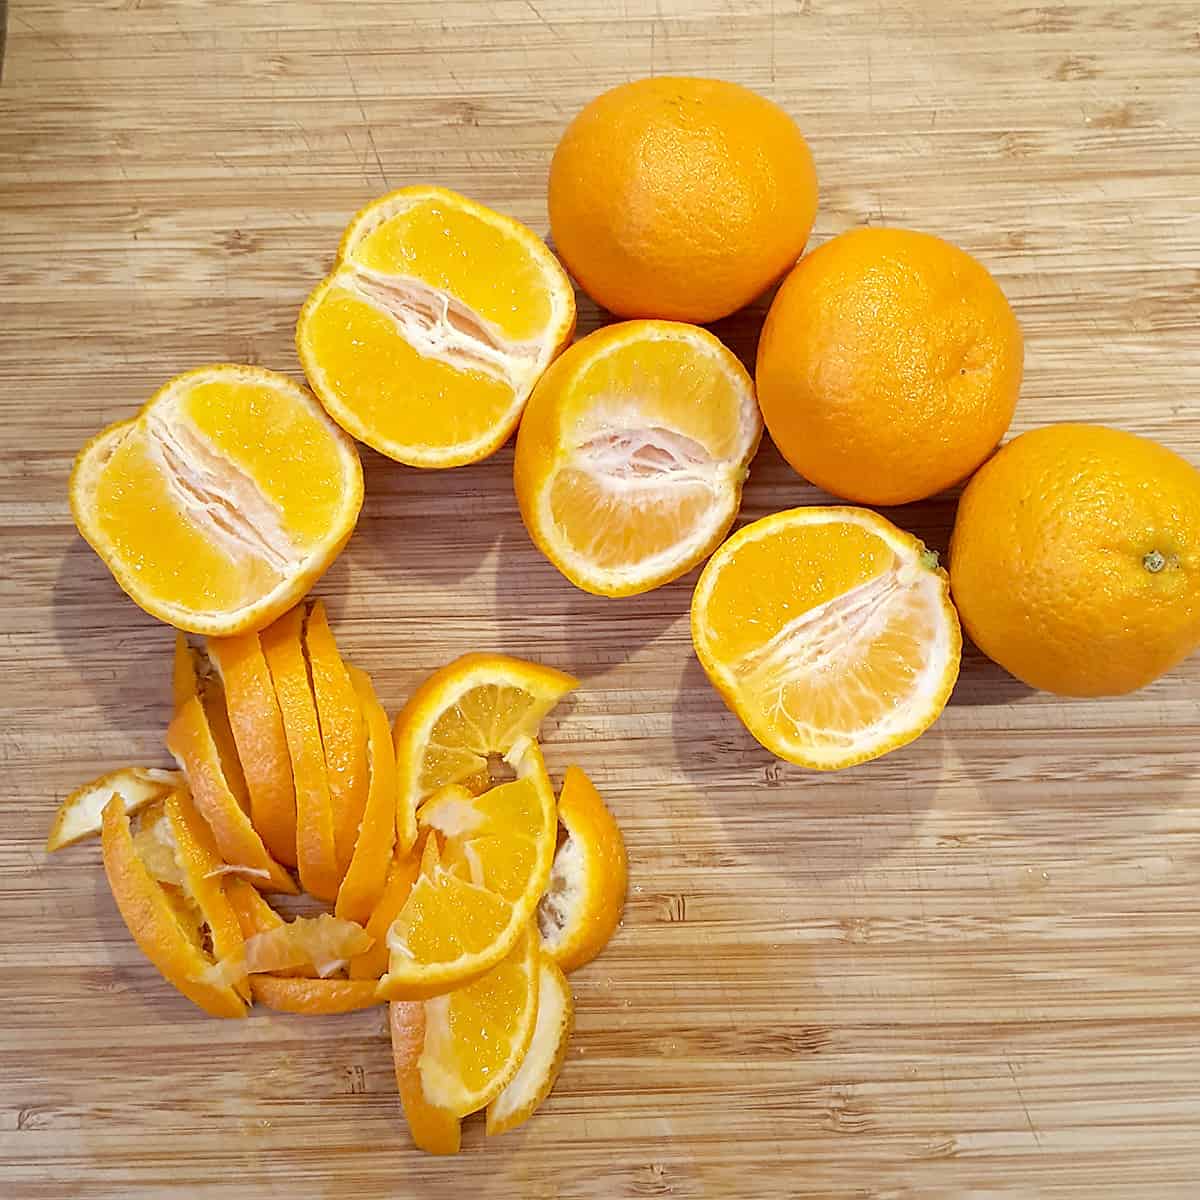 Mandarin oranges whole and sliced on a cutting board.